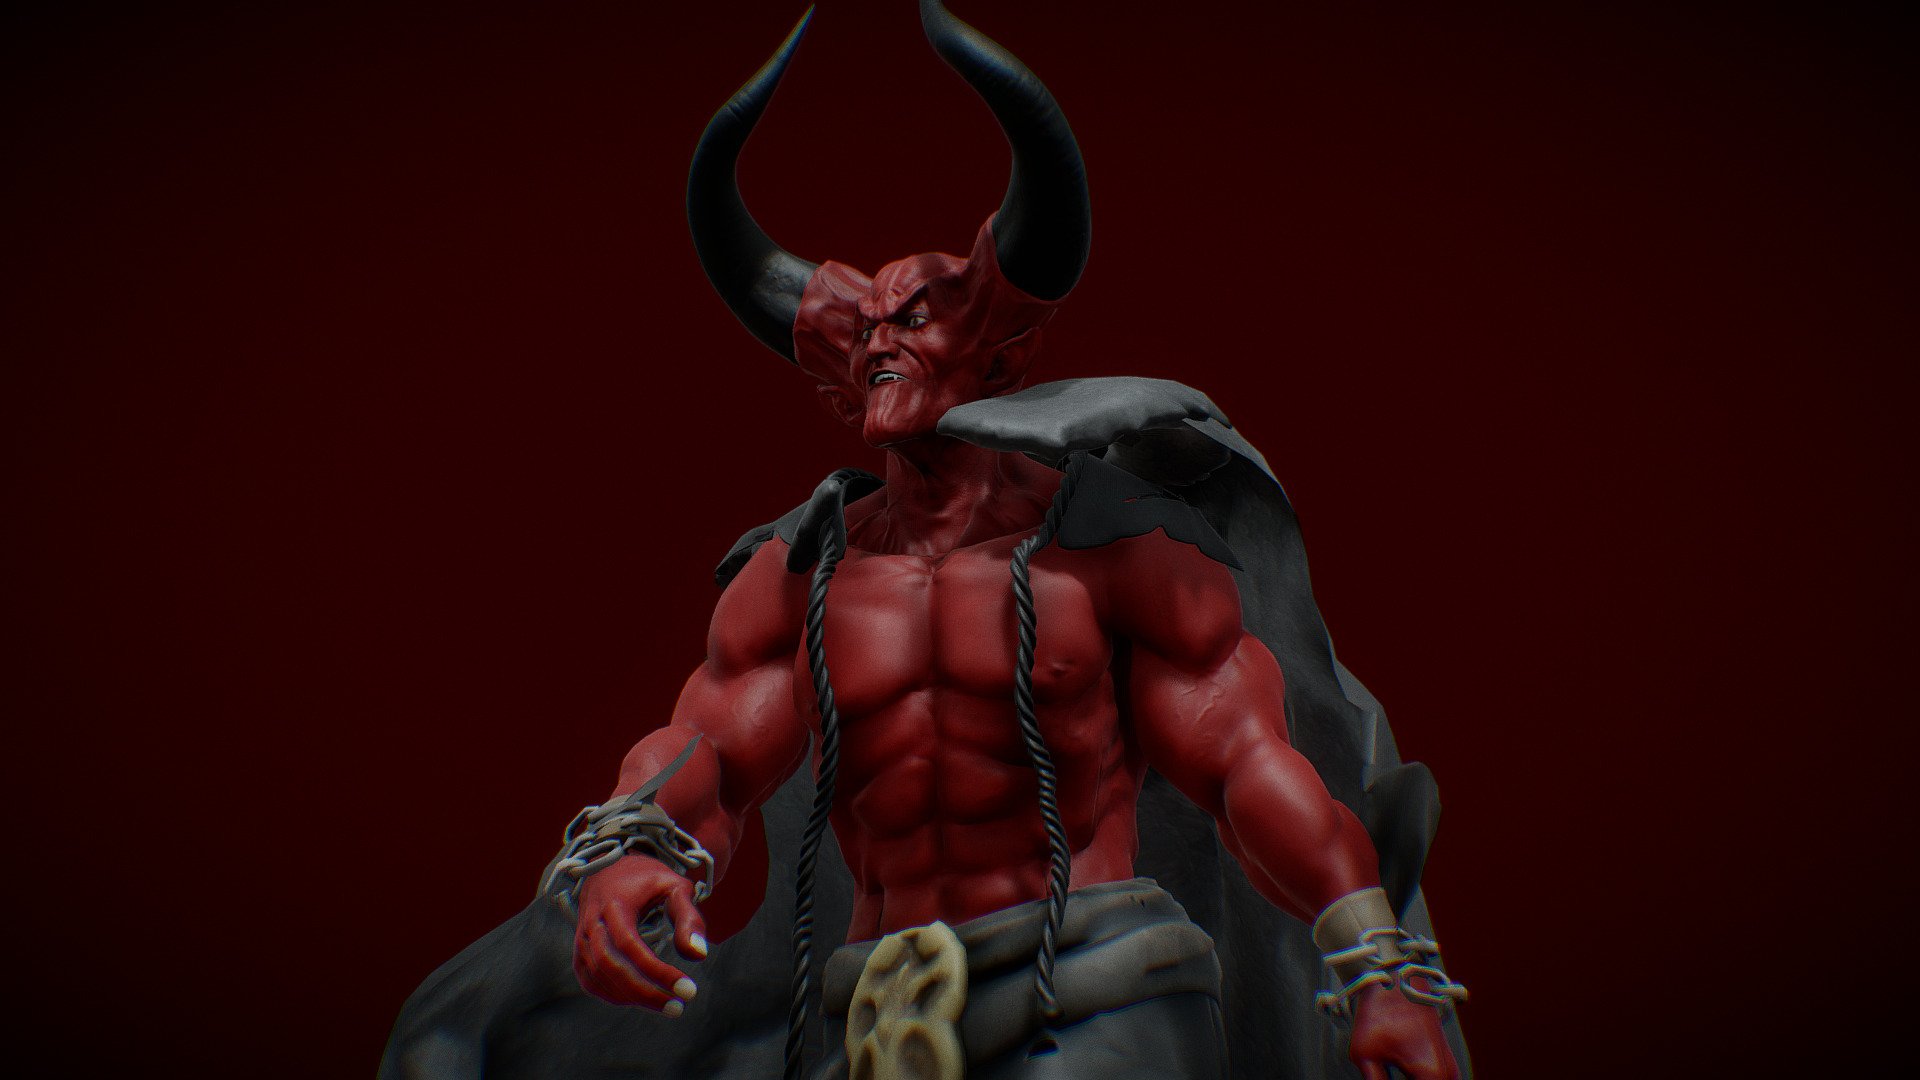 High-quality Lord of Darkness fan art from Legend

Textured
Mapped
Rigged
Animated 

PBR: 
Model rigged and textured ready for animating

Rig for: 3Dsmax, Maya and Iclone

Face Blend Shapes included 

Zip file contains obj, iavatar and fbx format with textures.
Test animation included

The Lord of Darkness, also known as the Dark Lord or simply Darkness, is the master of the underworld and the main antagonist of the 1985 dark fantasy film Legend.

If you have any questions please don’t hesitate to contact me. 
I will respond you ASAP.
I encourage you to check my other 3D models 3d model